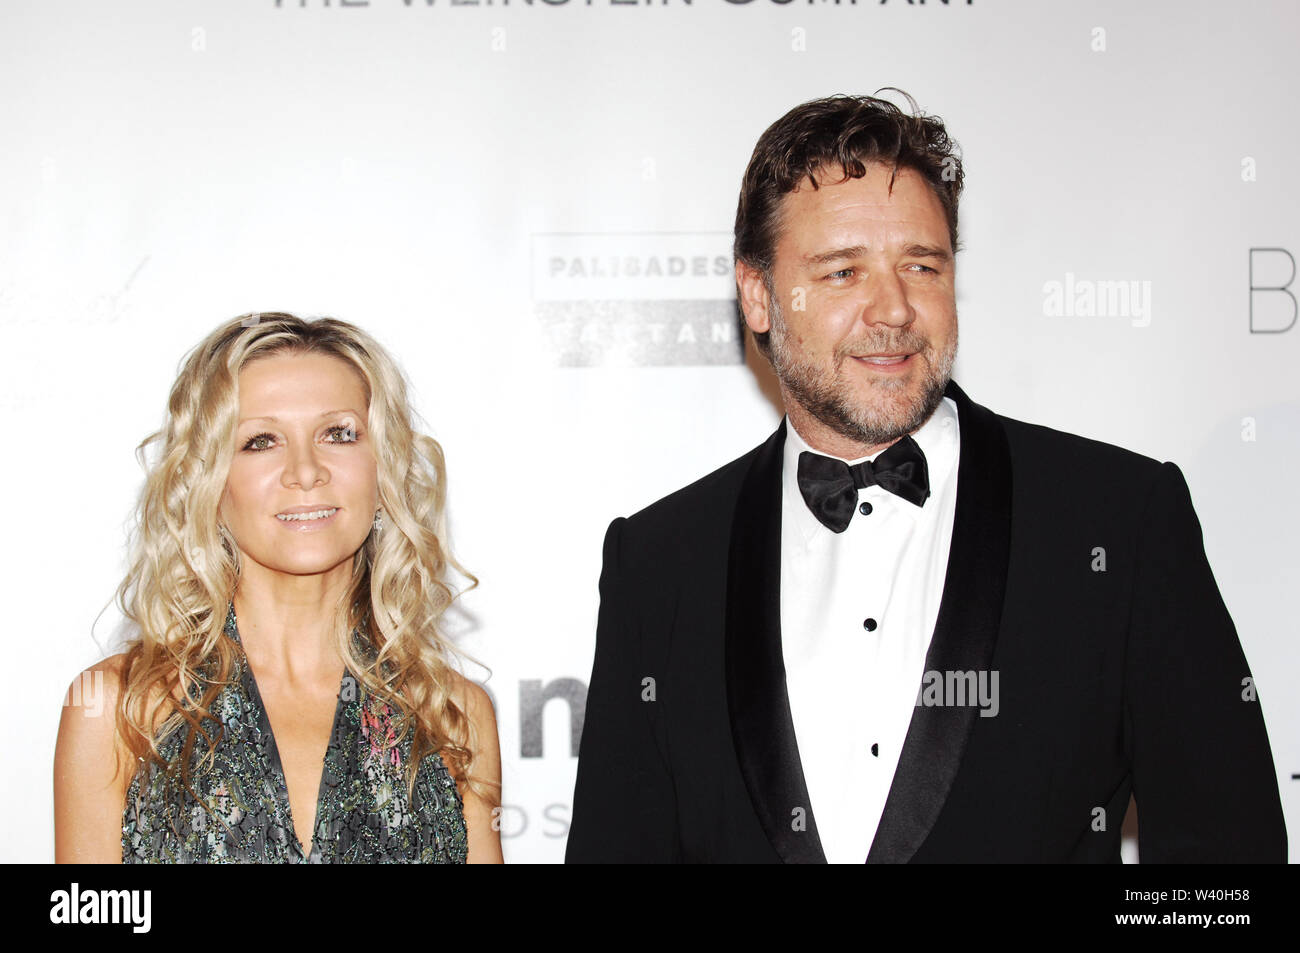 Spencer danielle photos of Russell Crowe’s